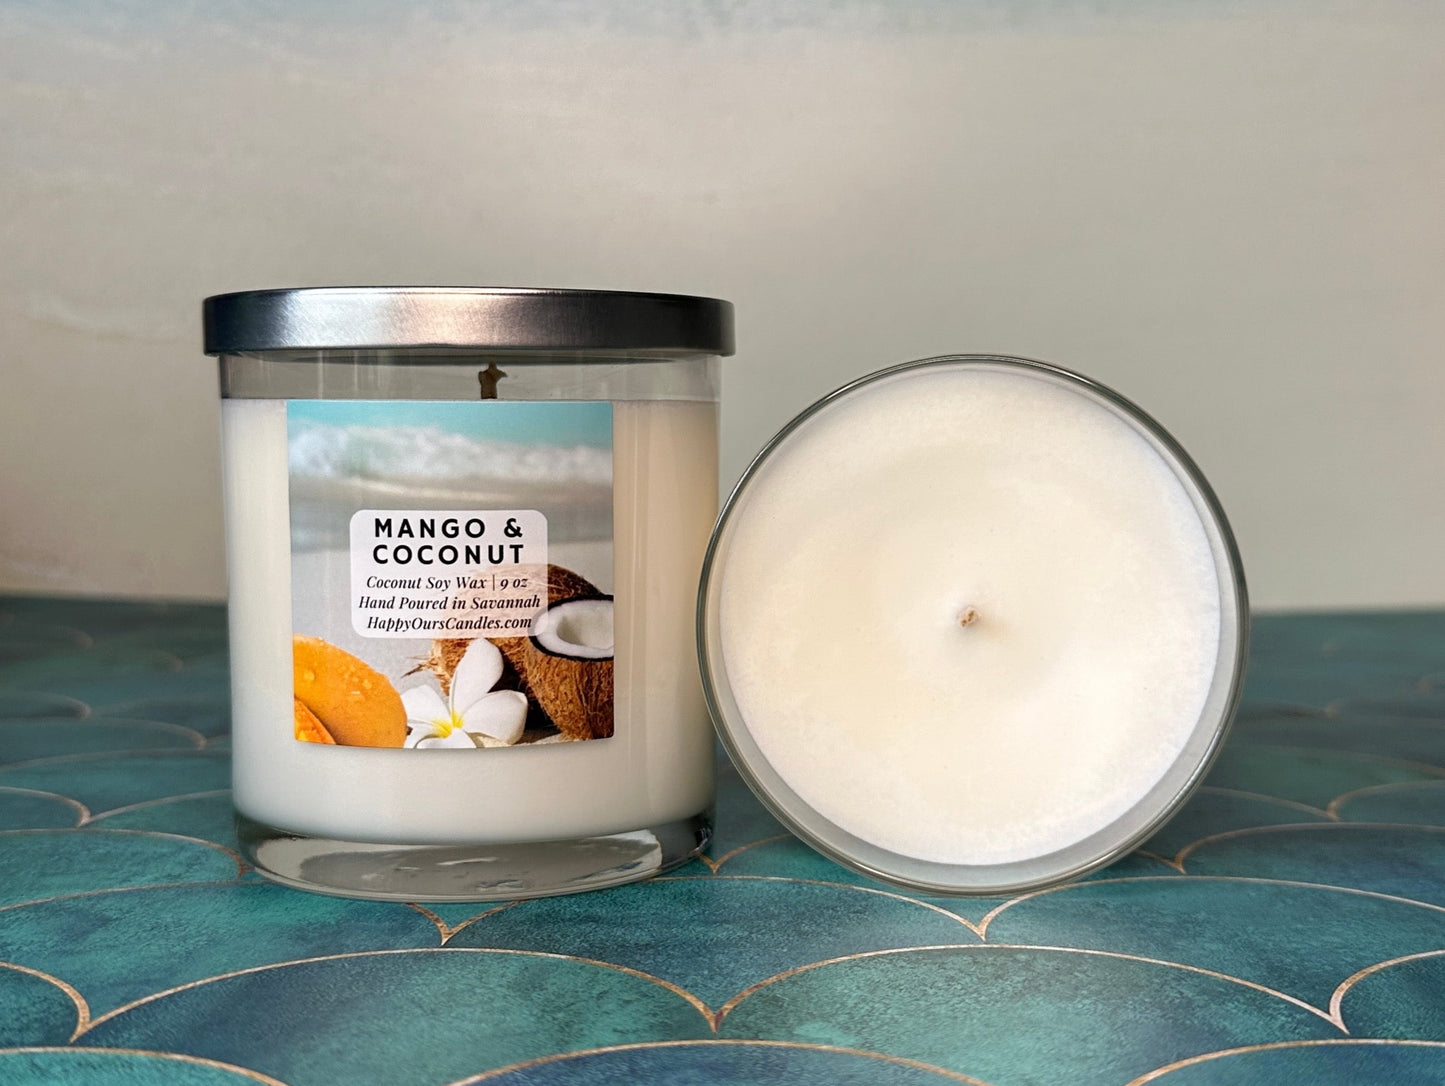 Mango & Coconut Scented Candle 9 oz